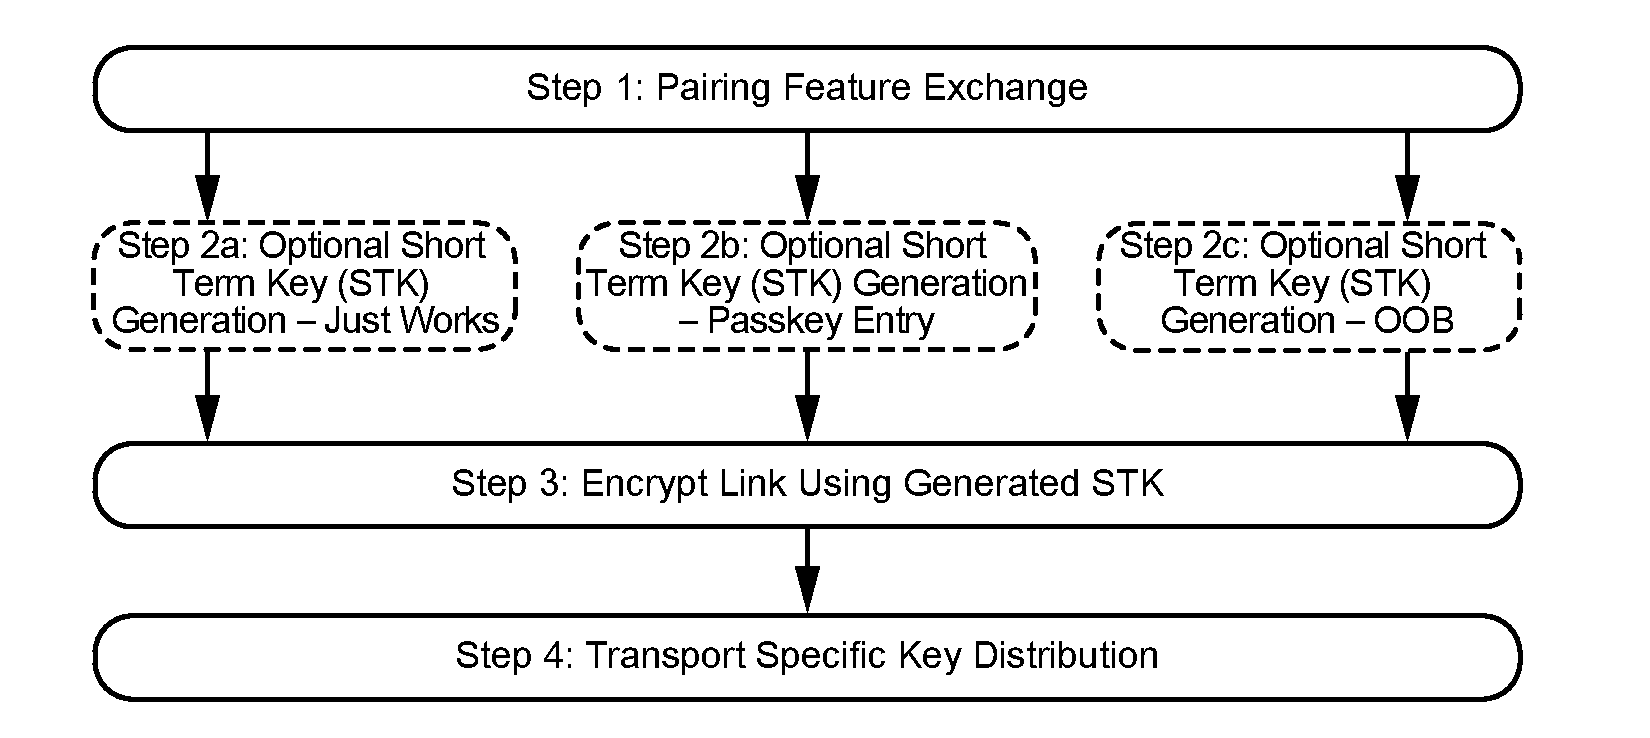 Pairing process overview